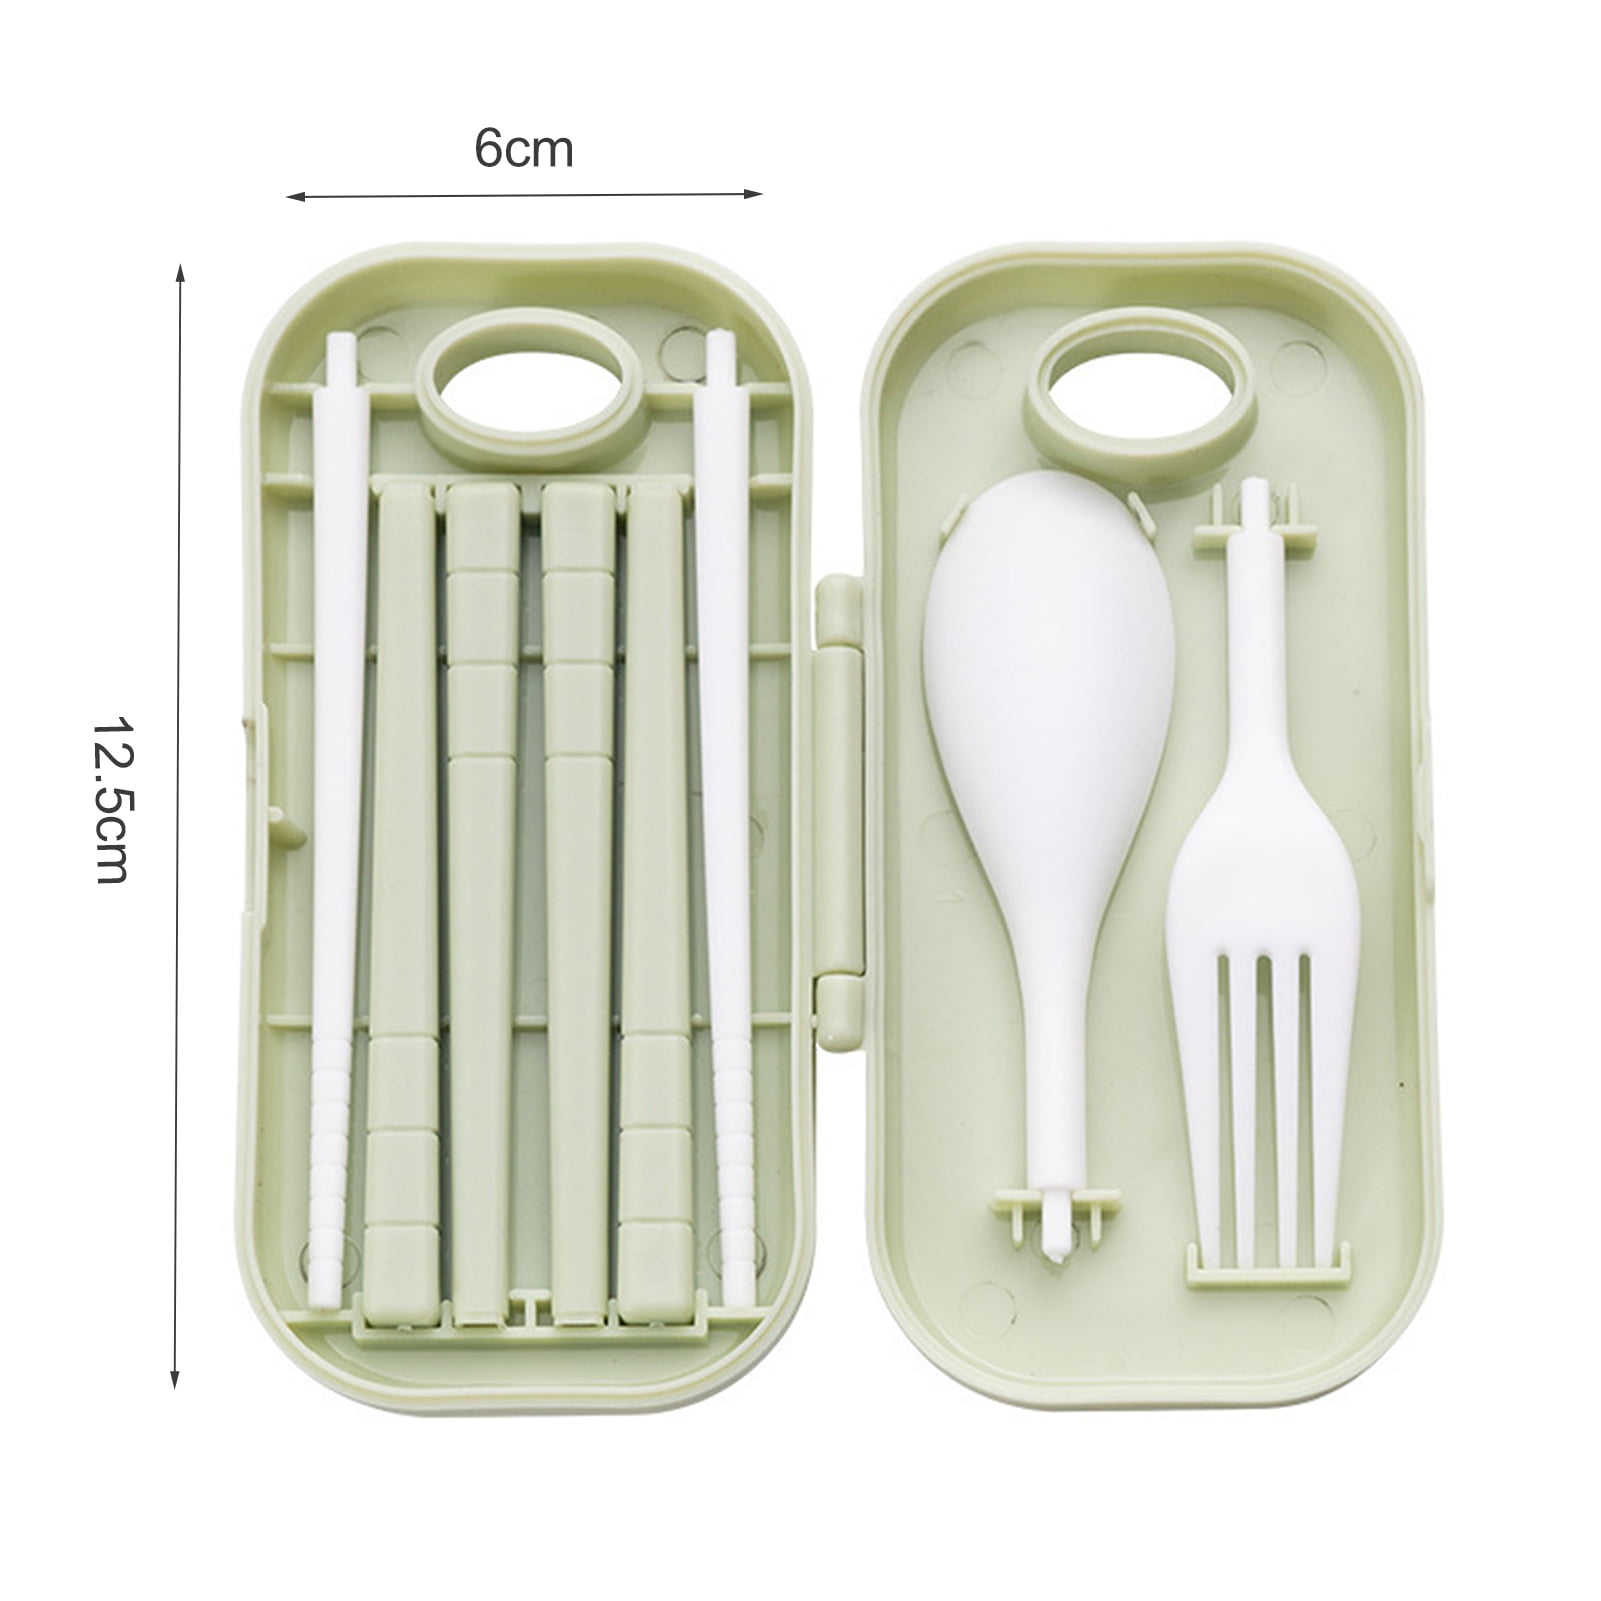 iOPQO Tableware Reusable Spoon Cutlery Fork Children'S Adult Portable Lunch  Box Cutlery Set For Travel Picnic Camping Or Daily Use At School Kitchen